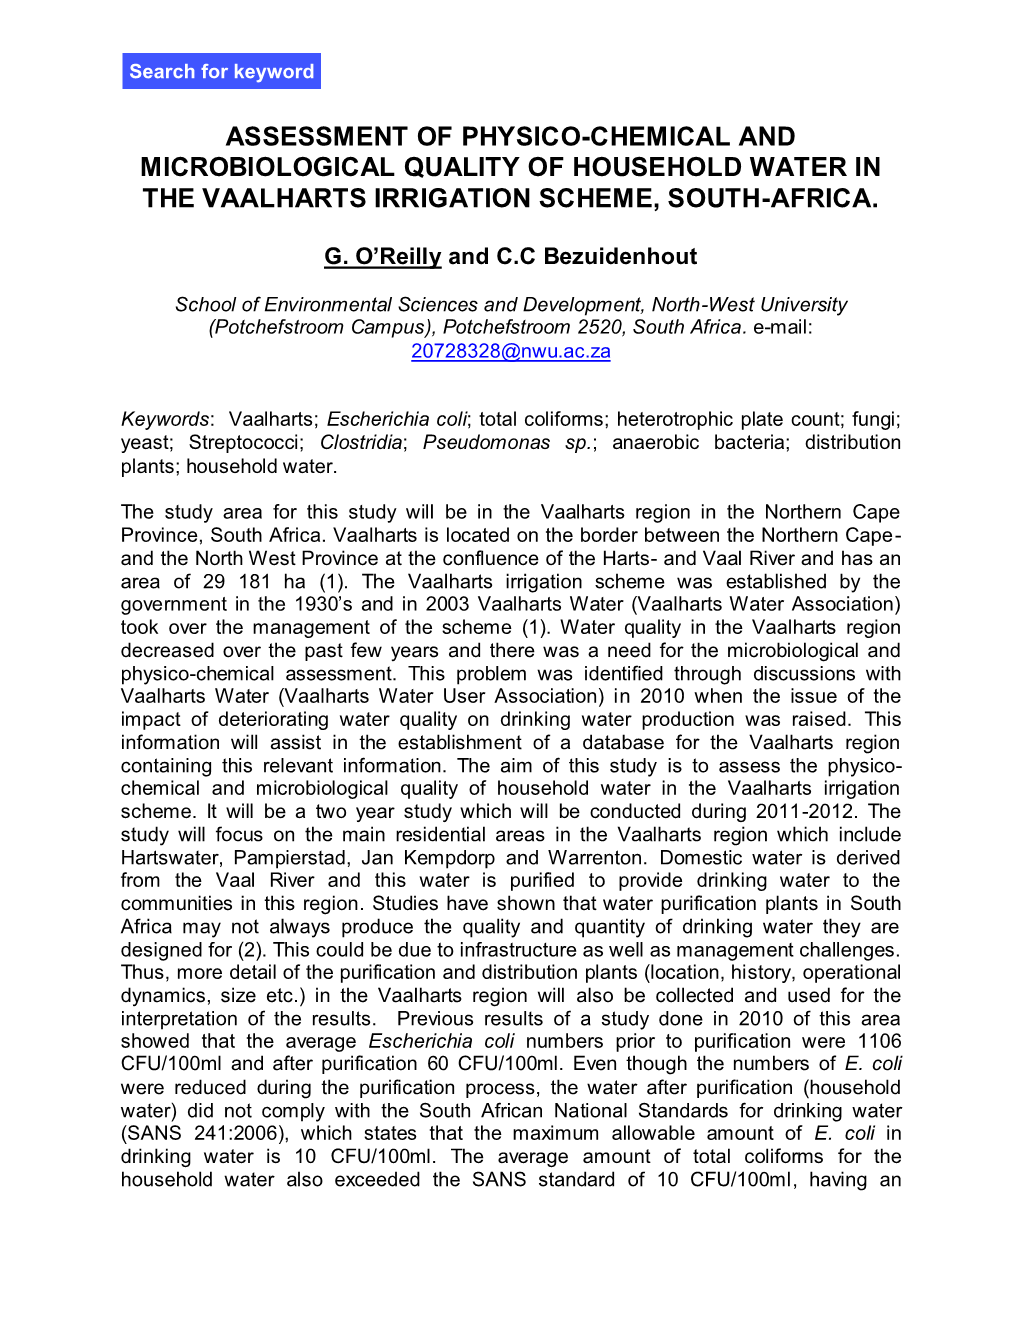 Assessment of Physico-Chemical and Microbiological Quality of Household Water in the Vaalharts Irrigation Scheme, South-Africa